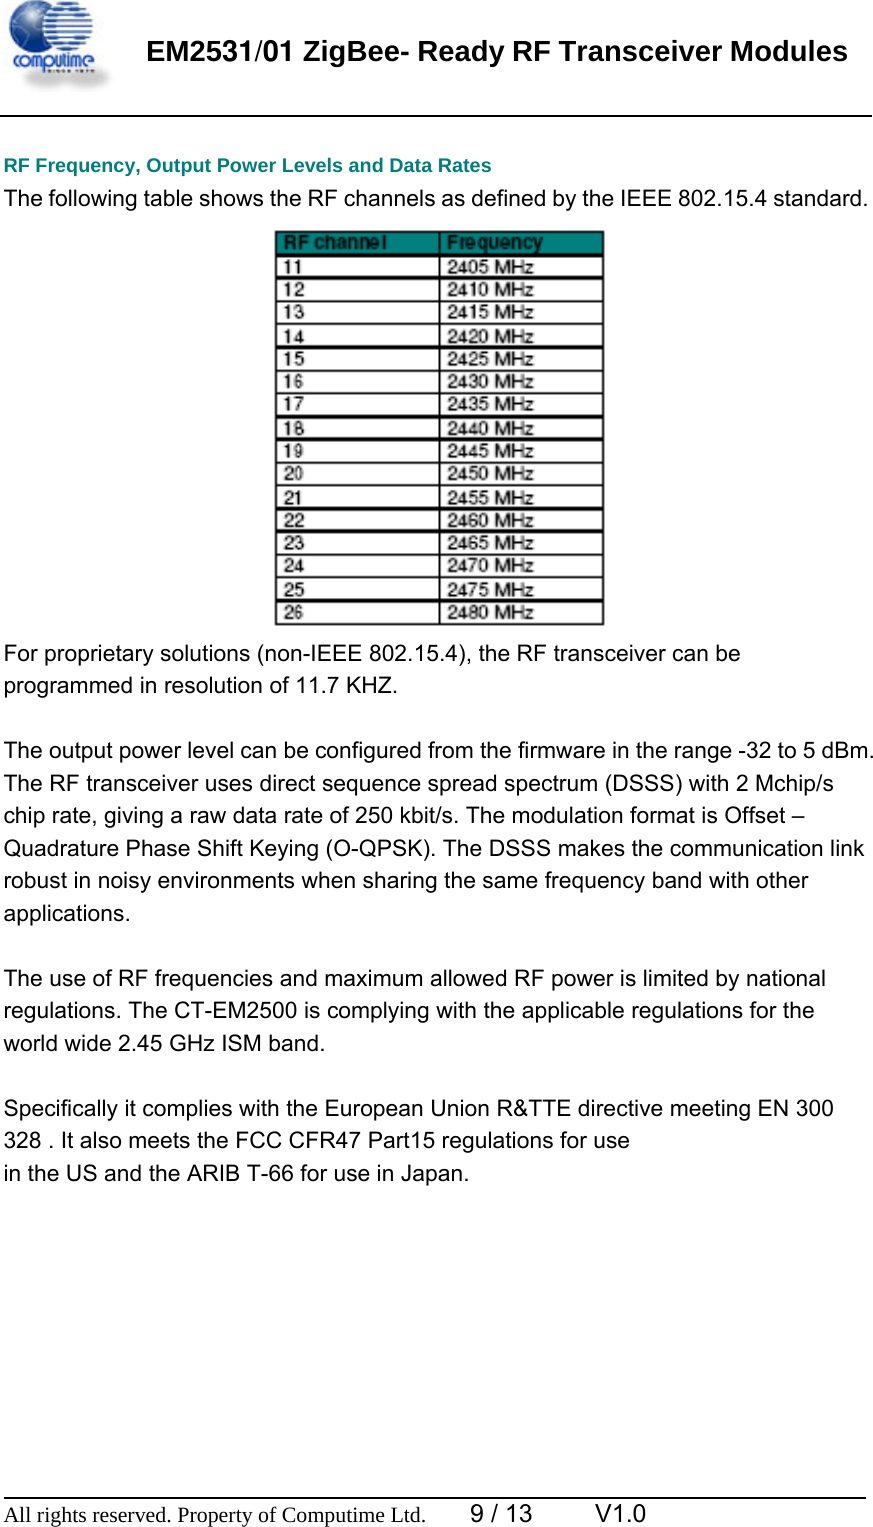    EM2531/01 ZigBee- Ready RF Transceiver Modules   RF Frequency, Output Power Levels and Data Rates The following table shows the RF channels as defined by the IEEE 802.15.4 standard.    For proprietary solutions (non-IEEE 802.15.4), the RF transceiver can be programmed in resolution of 11.7 KHZ.  The output power level can be configured from the firmware in the range -32 to 5 dBm. The RF transceiver uses direct sequence spread spectrum (DSSS) with 2 Mchip/s chip rate, giving a raw data rate of 250 kbit/s. The modulation format is Offset – Quadrature Phase Shift Keying (O-QPSK). The DSSS makes the communication link robust in noisy environments when sharing the same frequency band with other applications.  The use of RF frequencies and maximum allowed RF power is limited by national regulations. The CT-EM2500 is complying with the applicable regulations for the world wide 2.45 GHz ISM band.  Specifically it complies with the European Union R&amp;TTE directive meeting EN 300 328 . It also meets the FCC CFR47 Part15 regulations for use in the US and the ARIB T-66 for use in Japan.                                                                               All rights reserved. Property of Computime Ltd.        9 / 13     V1.0  